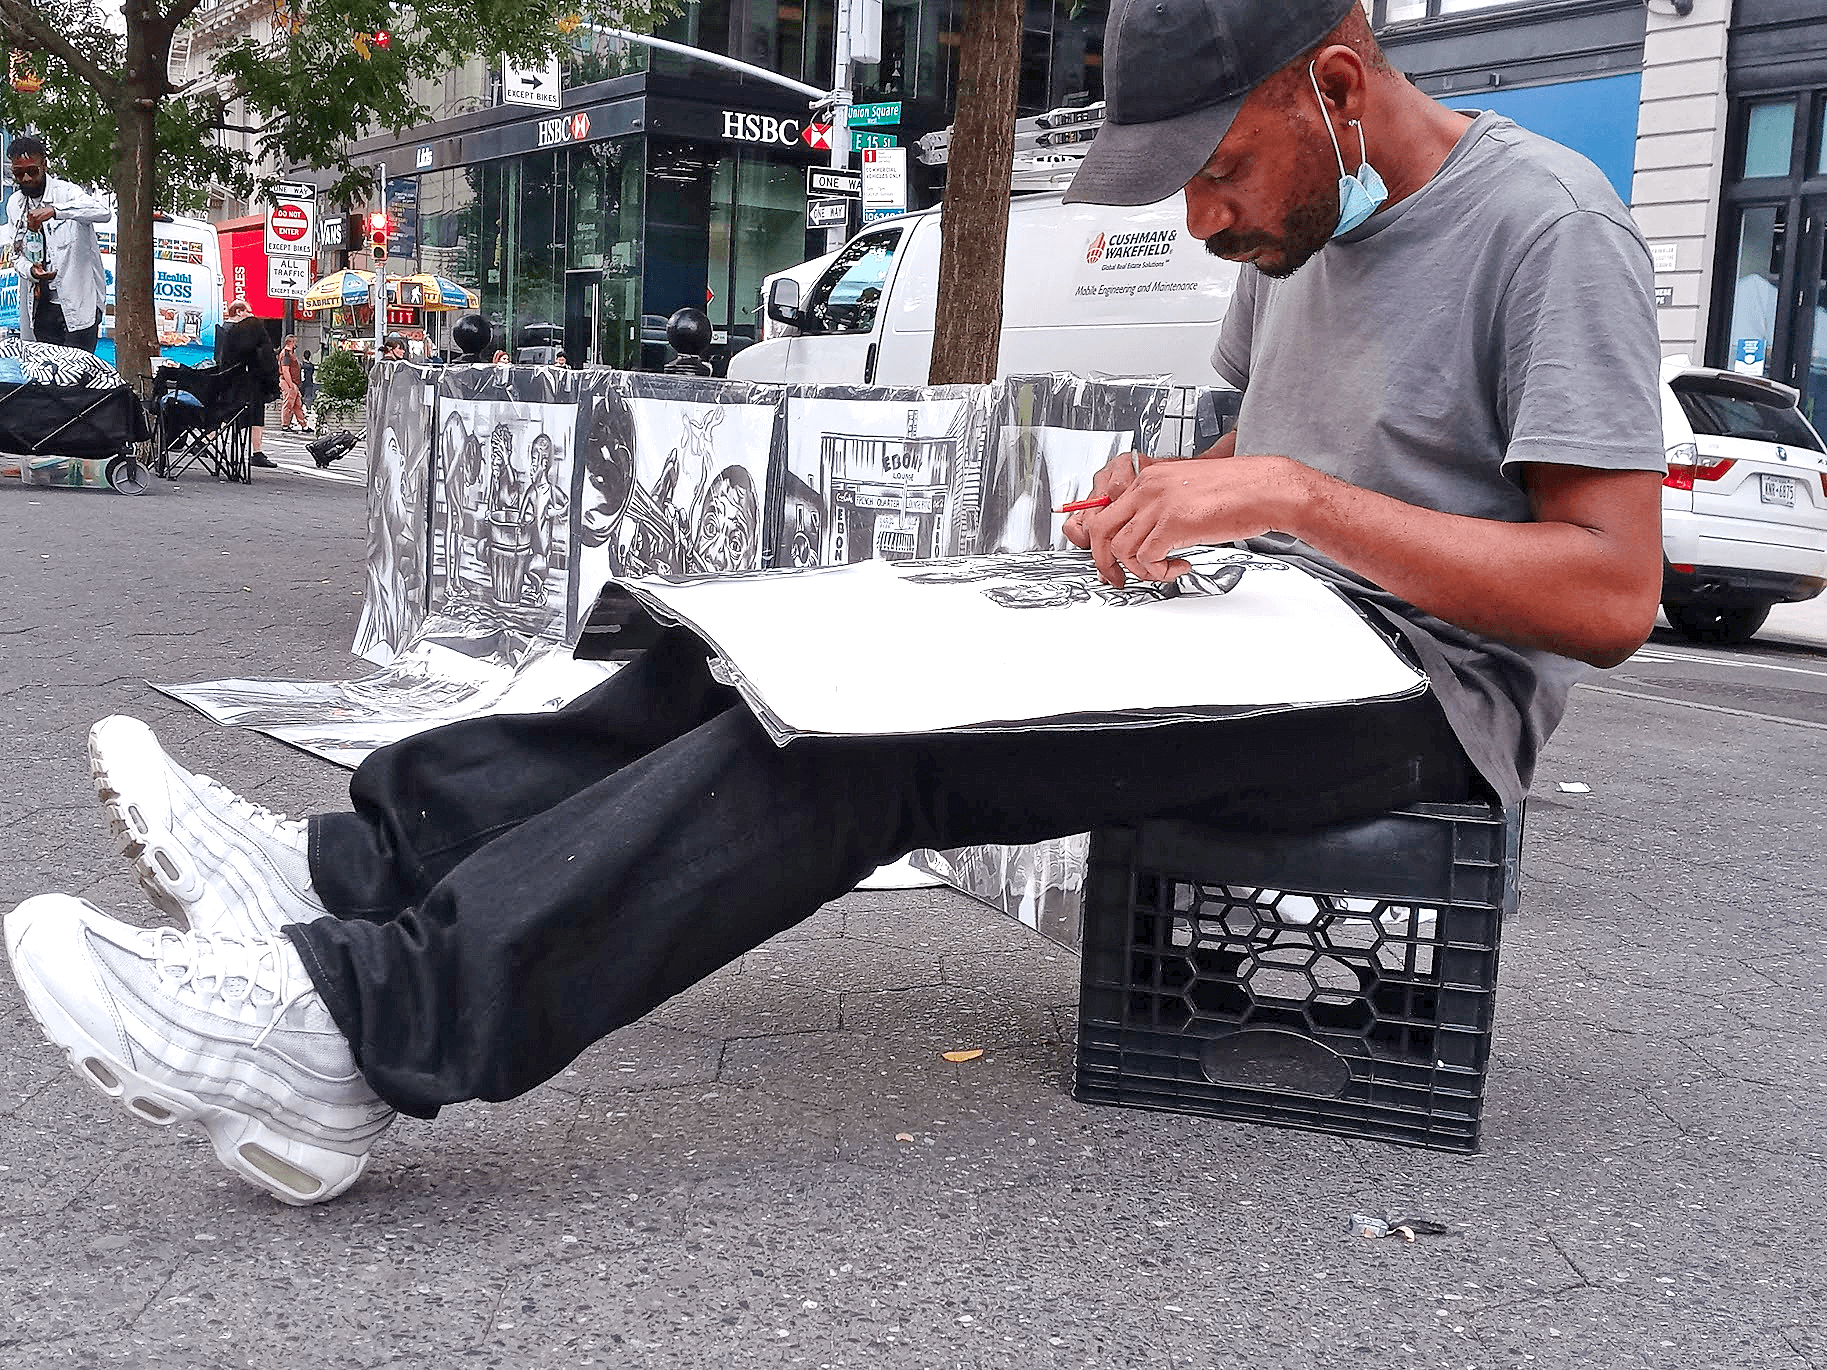 Artist at work in NYC